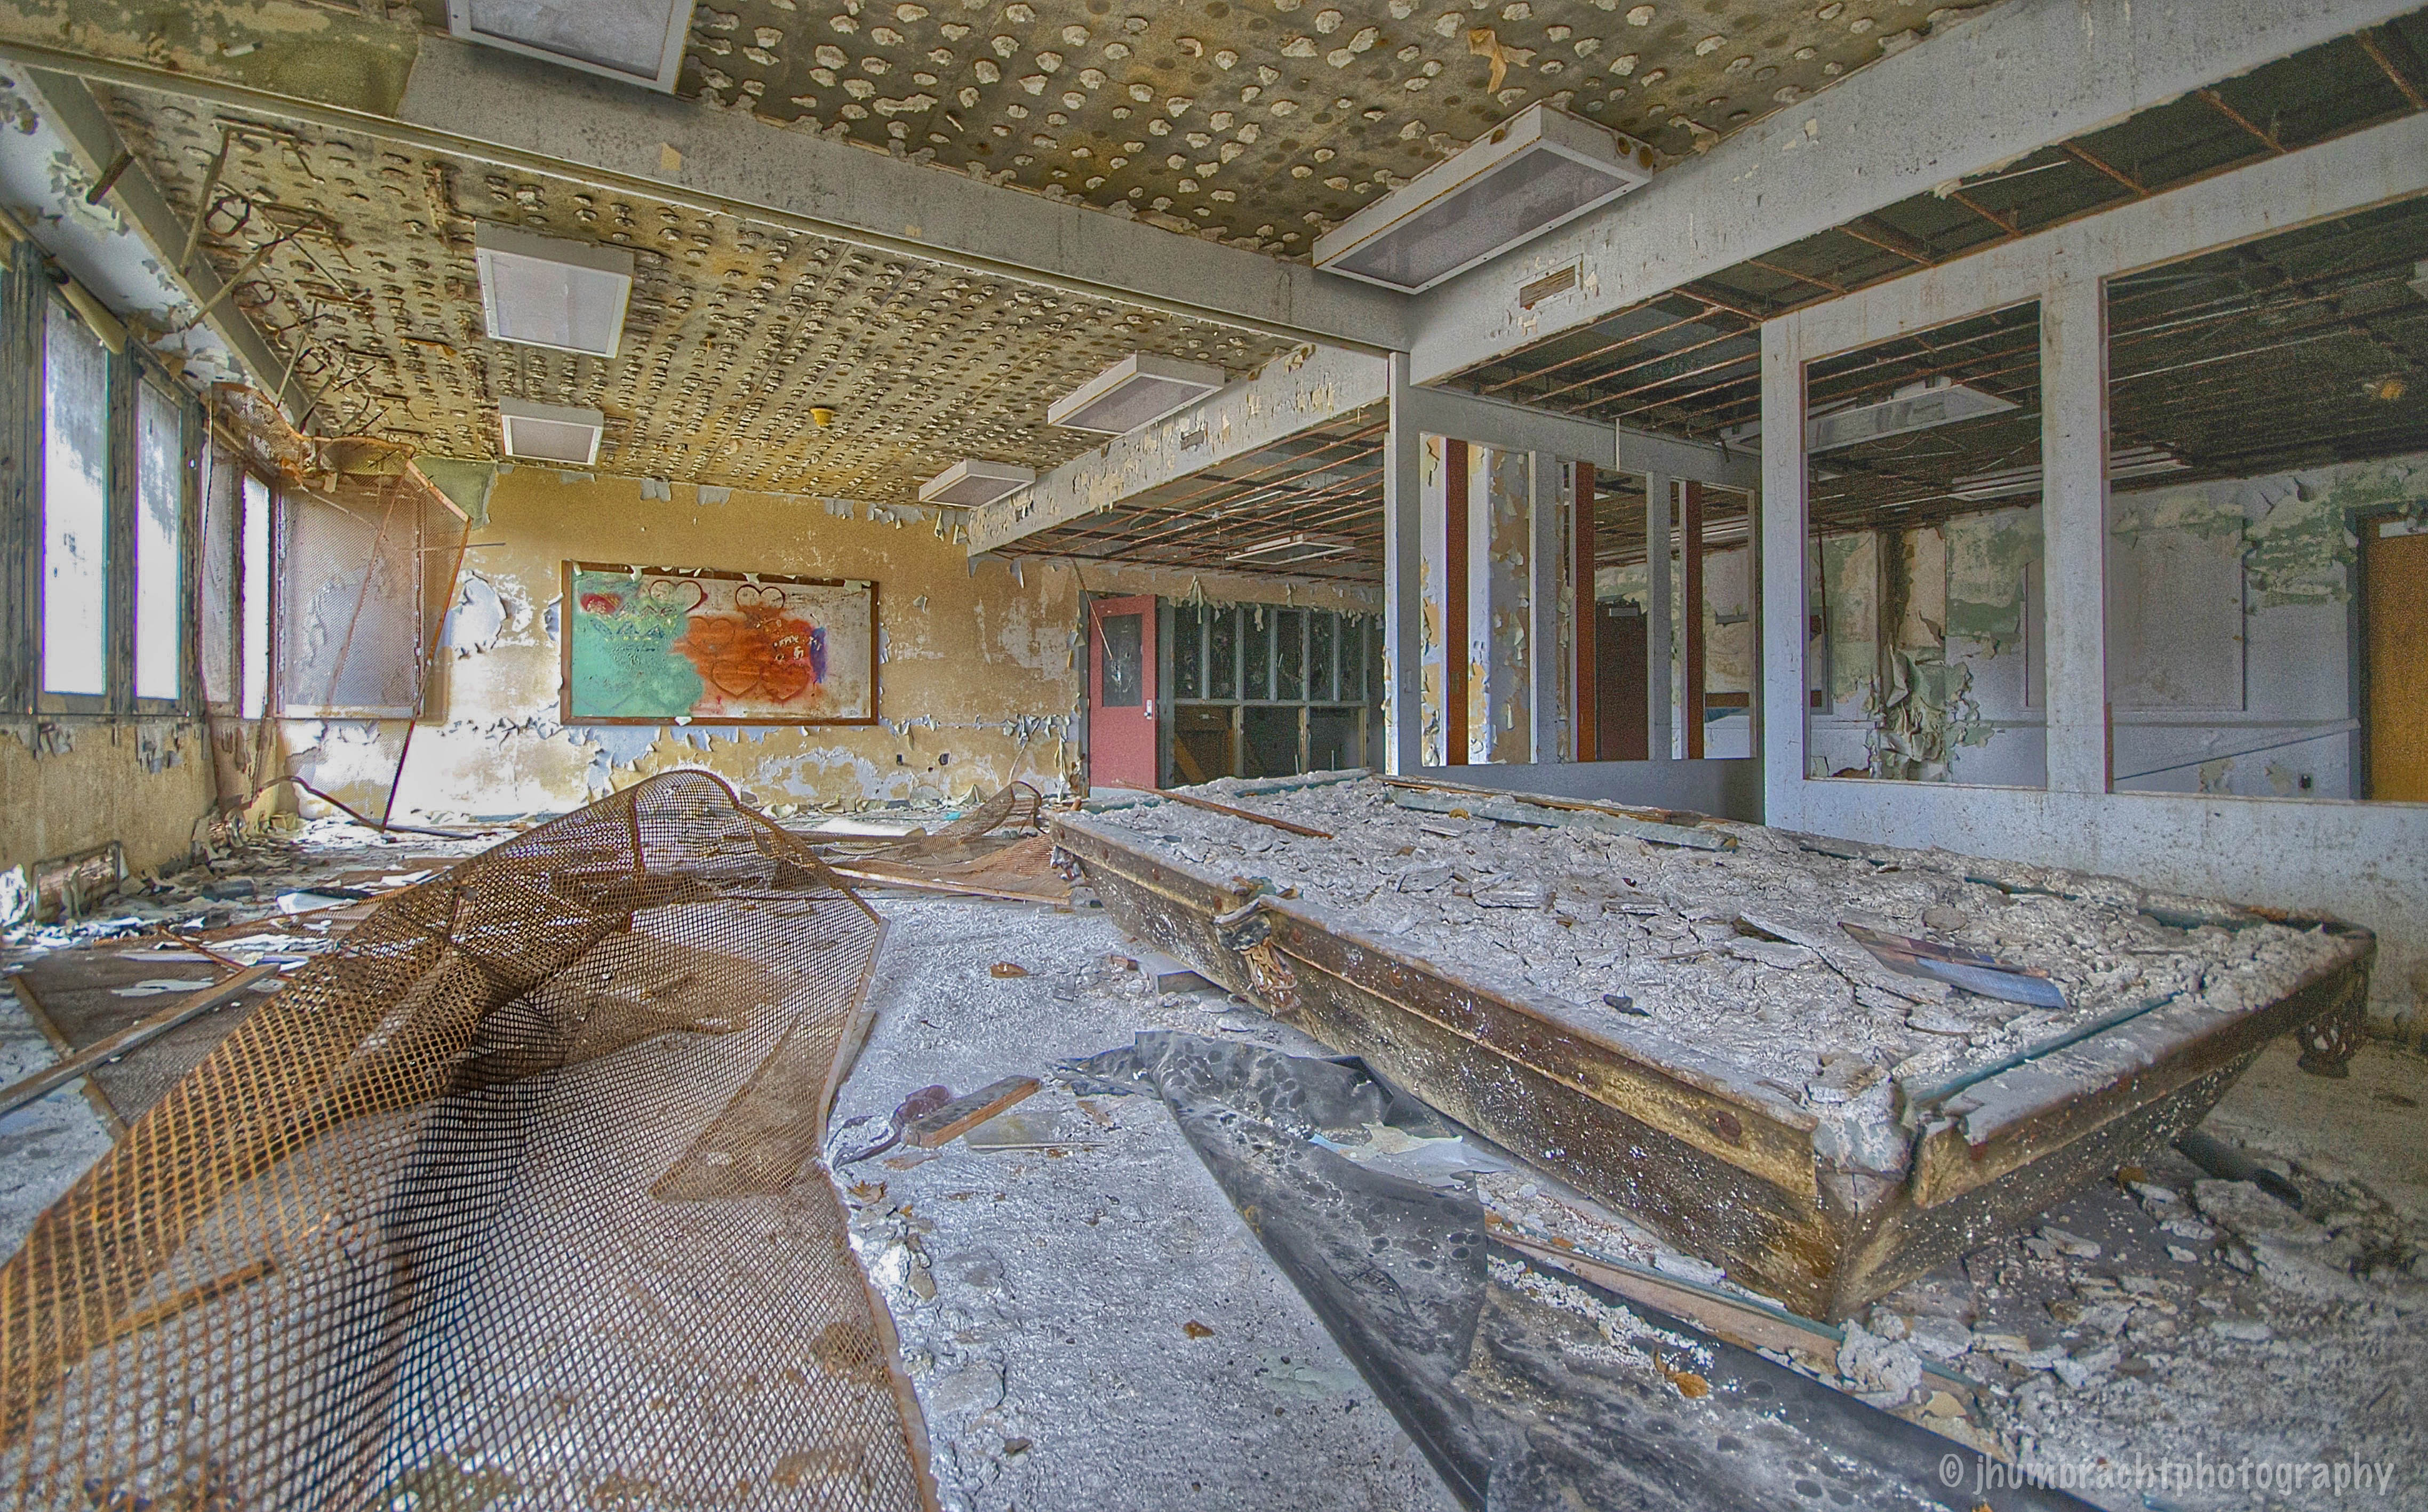 Indiana Central State Hospital outside Indianapolis Indiana photo taken by Indianapolis-based Architectural Photographer Jason Humbracht in 2014